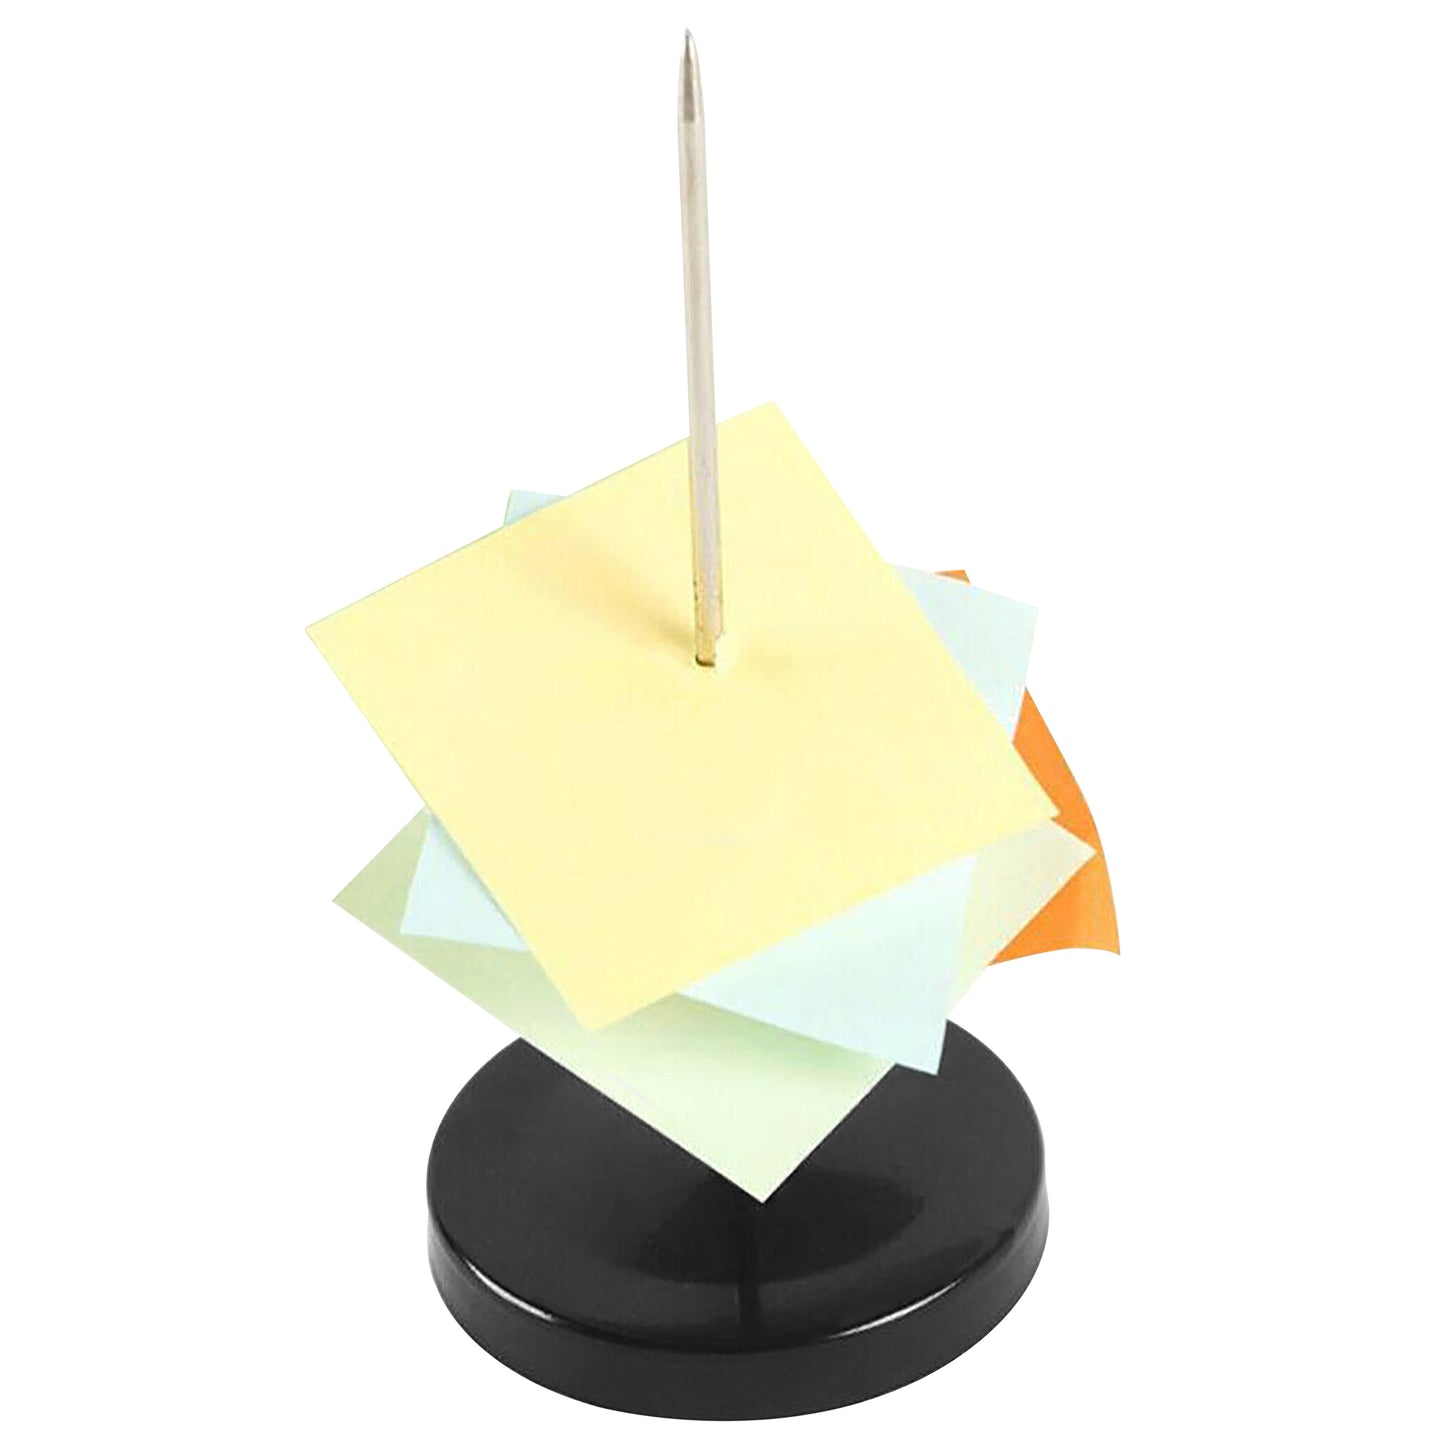 Pack of 3 Paper Spike Note Metal Holder Suitable for Restaurant Kitchen Order Rod Retail Office Hotel